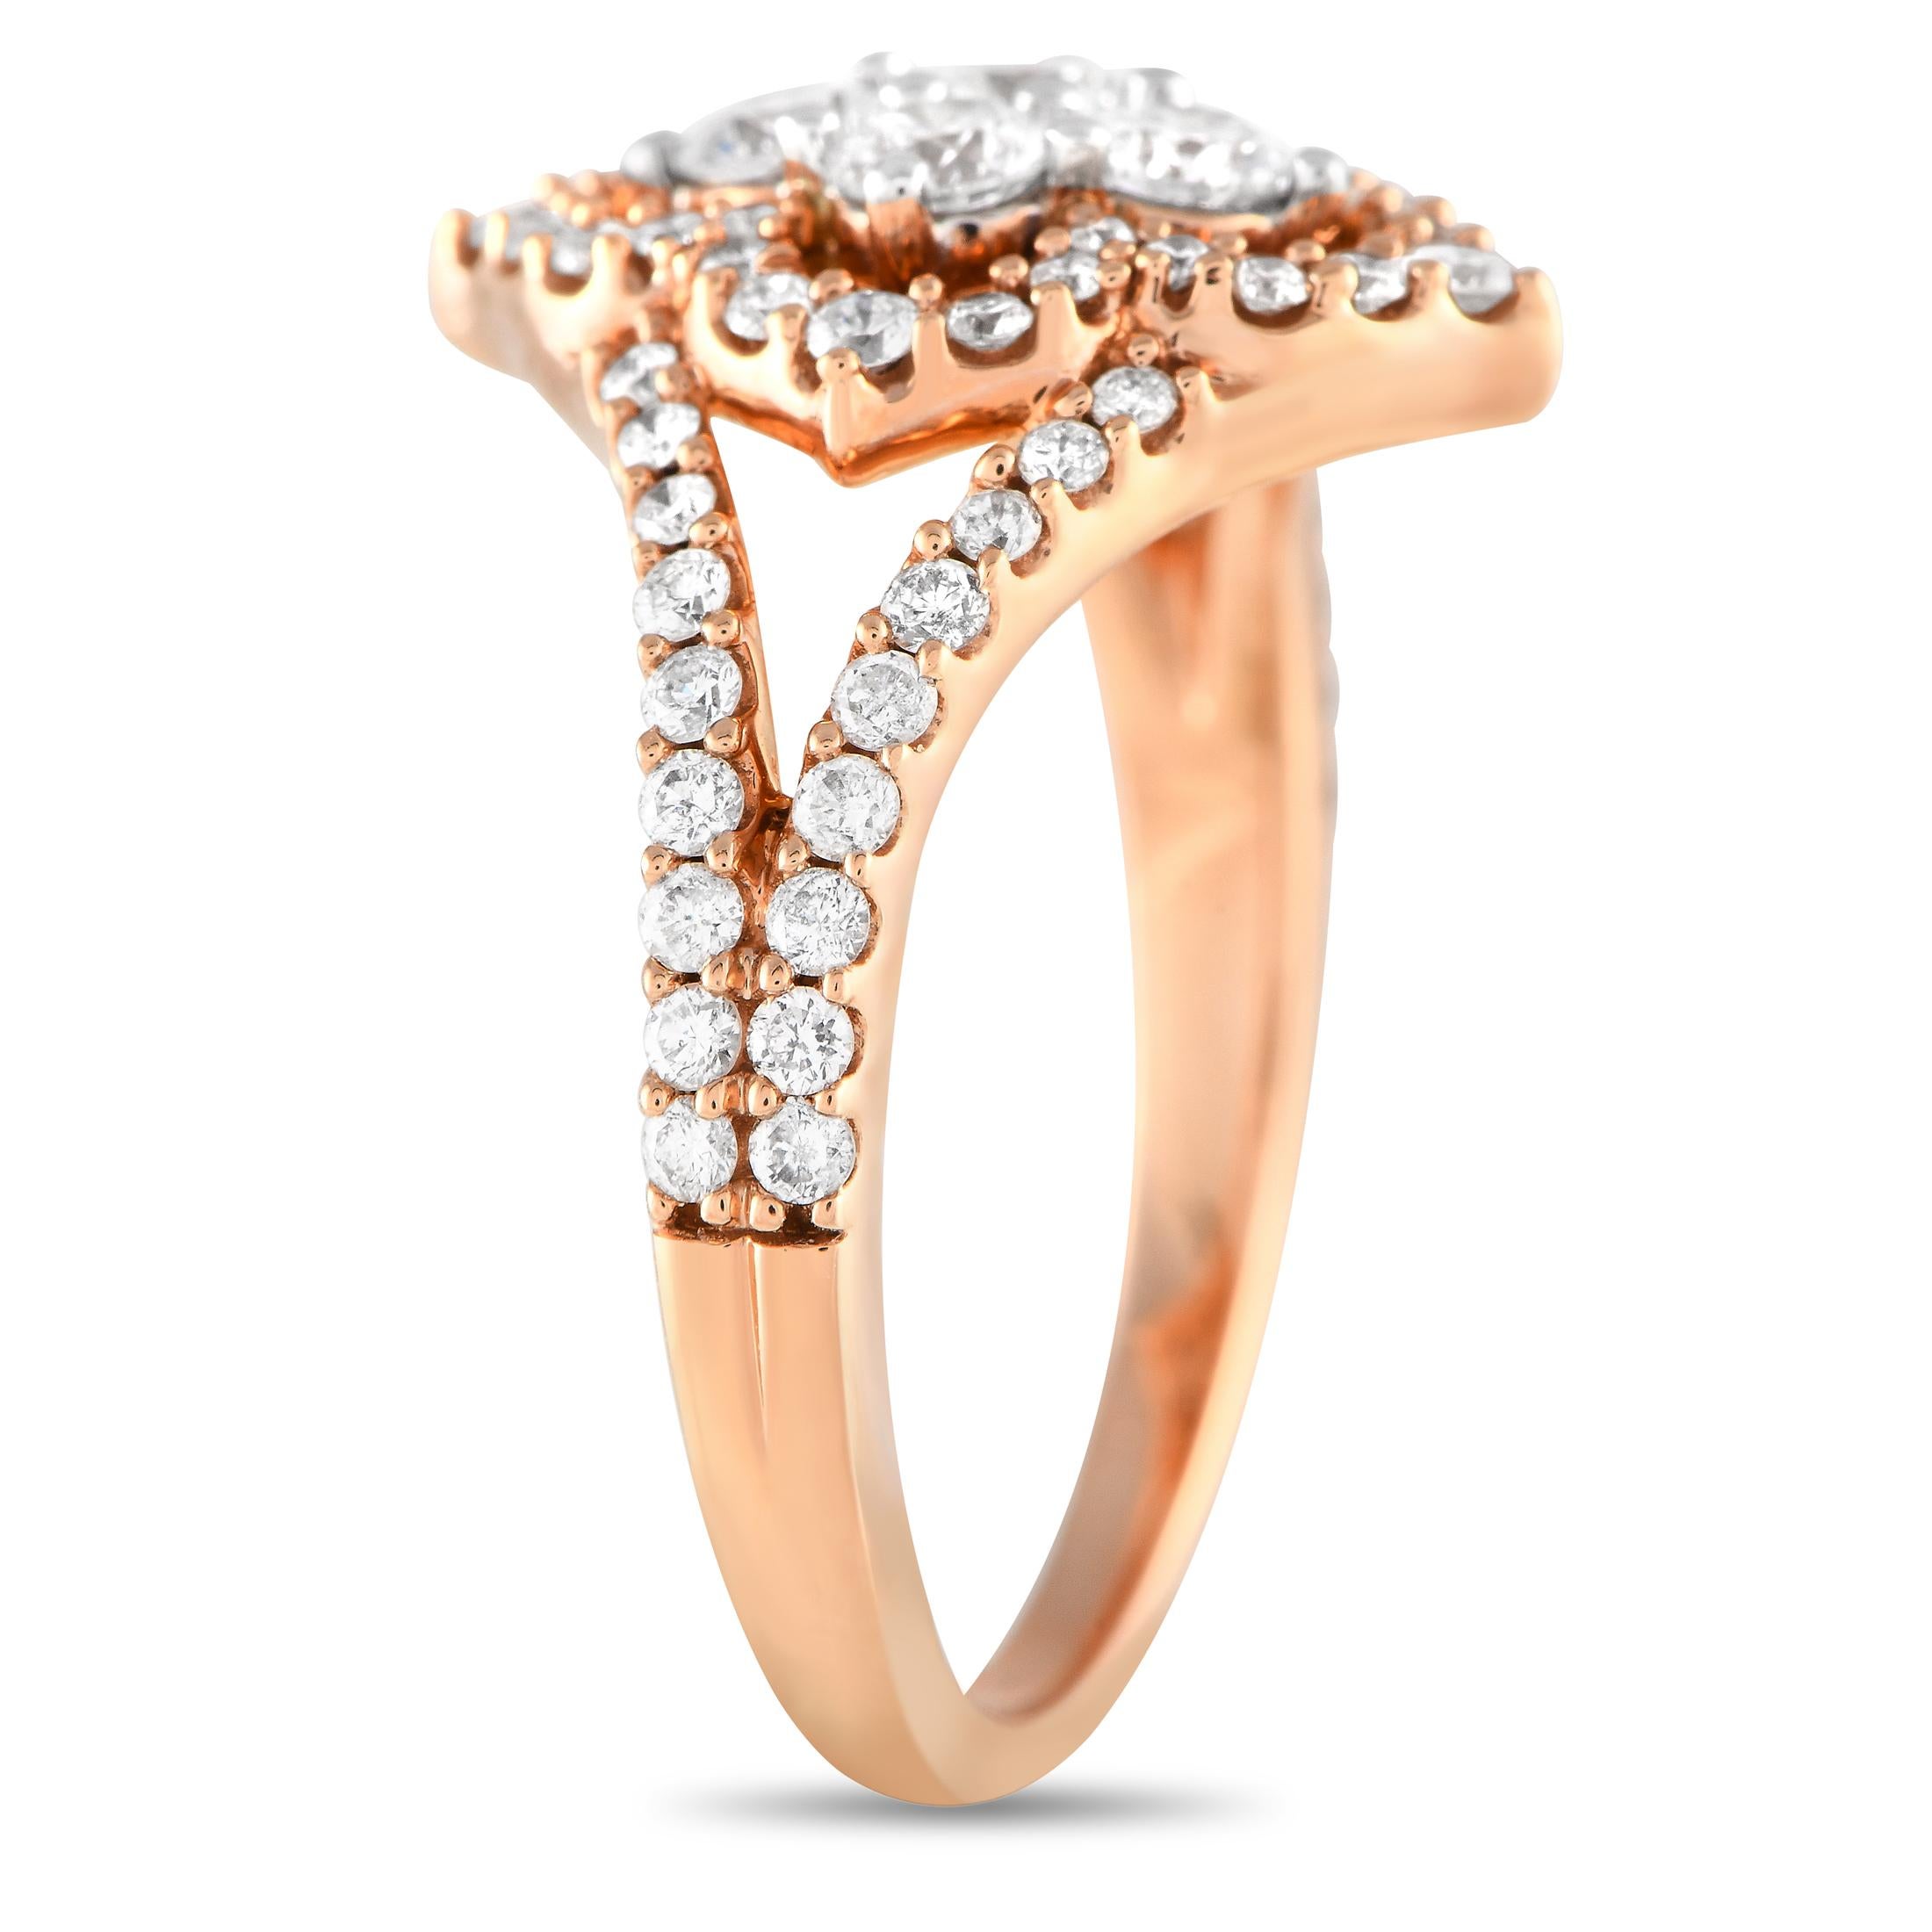 Like icing on a cake, this diamond ring is sure to make any ensemble extra appealing. It is crafted in 14K rose gold and has a diamond-encrusted split shank that forms a diamond-traced rhombus centerpiece. For a truly eye-catching focal point, the